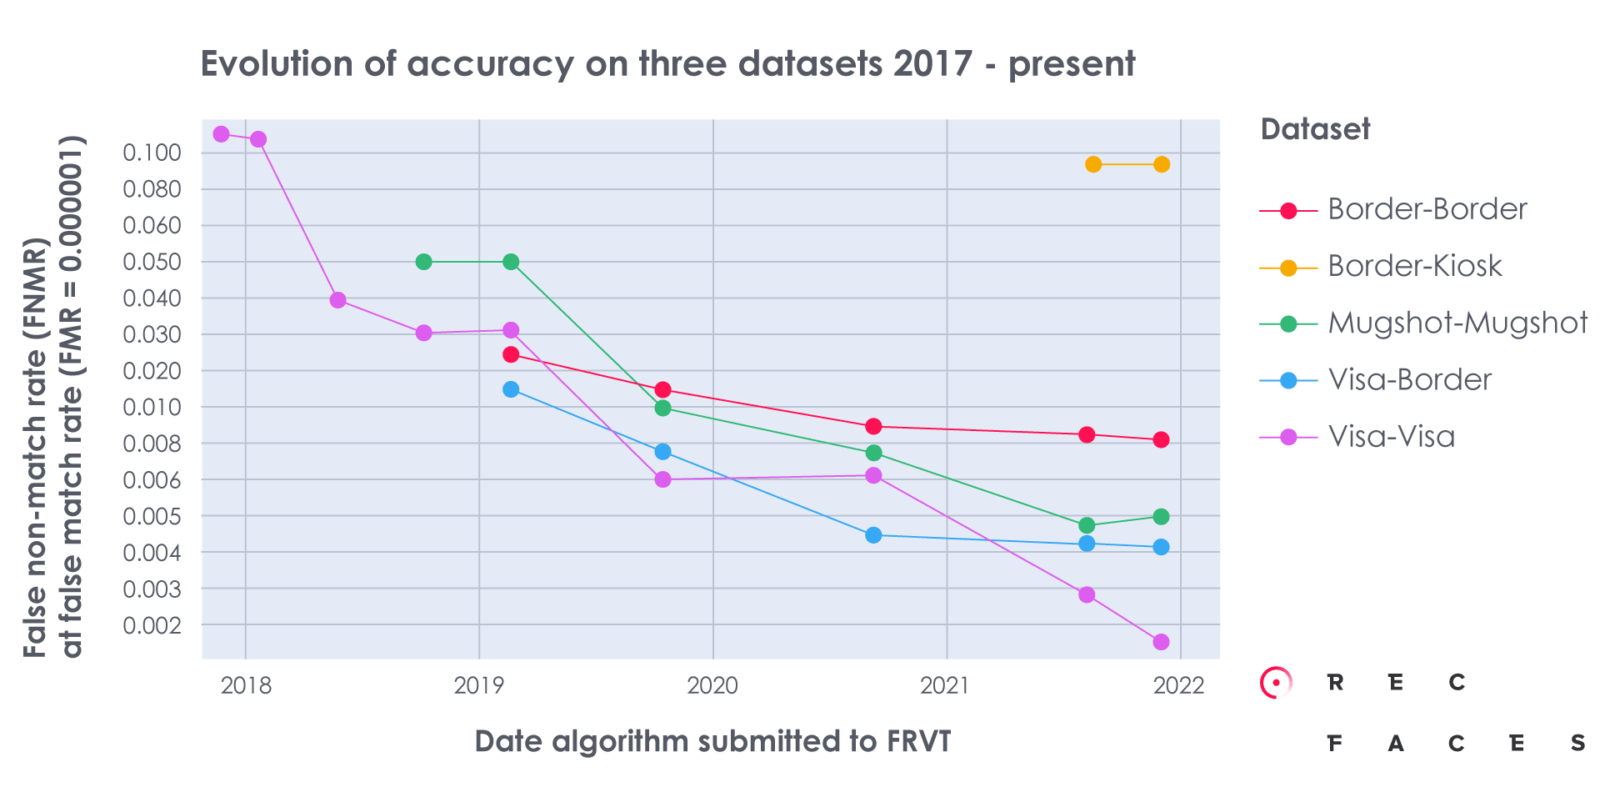 https://recfaces.ru/wp-content/uploads/2022/10/evolution-of-accuracy-on-three-datasets-2017.png